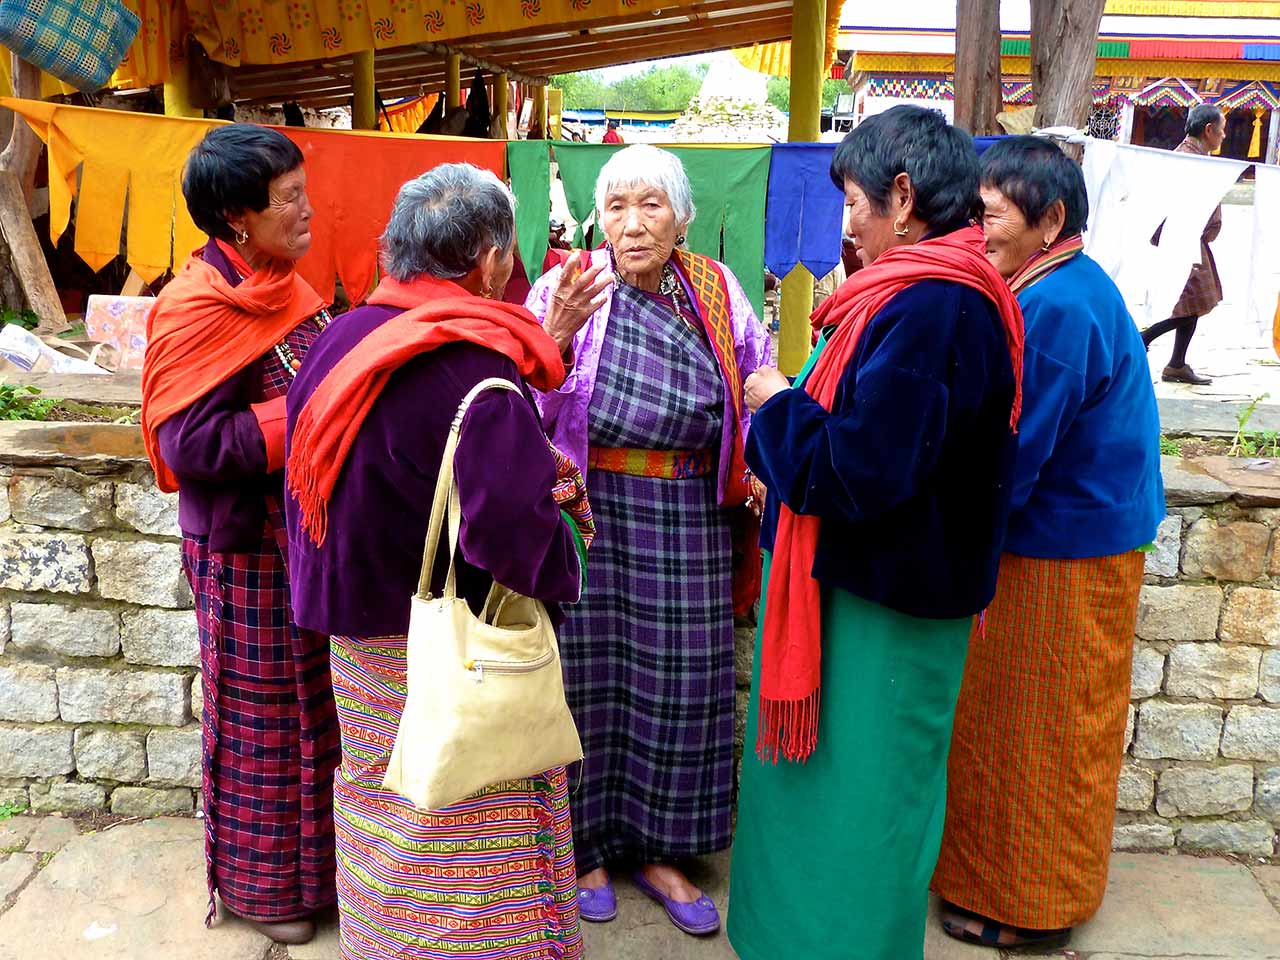 Locals still wear their national costumes as their daily attire